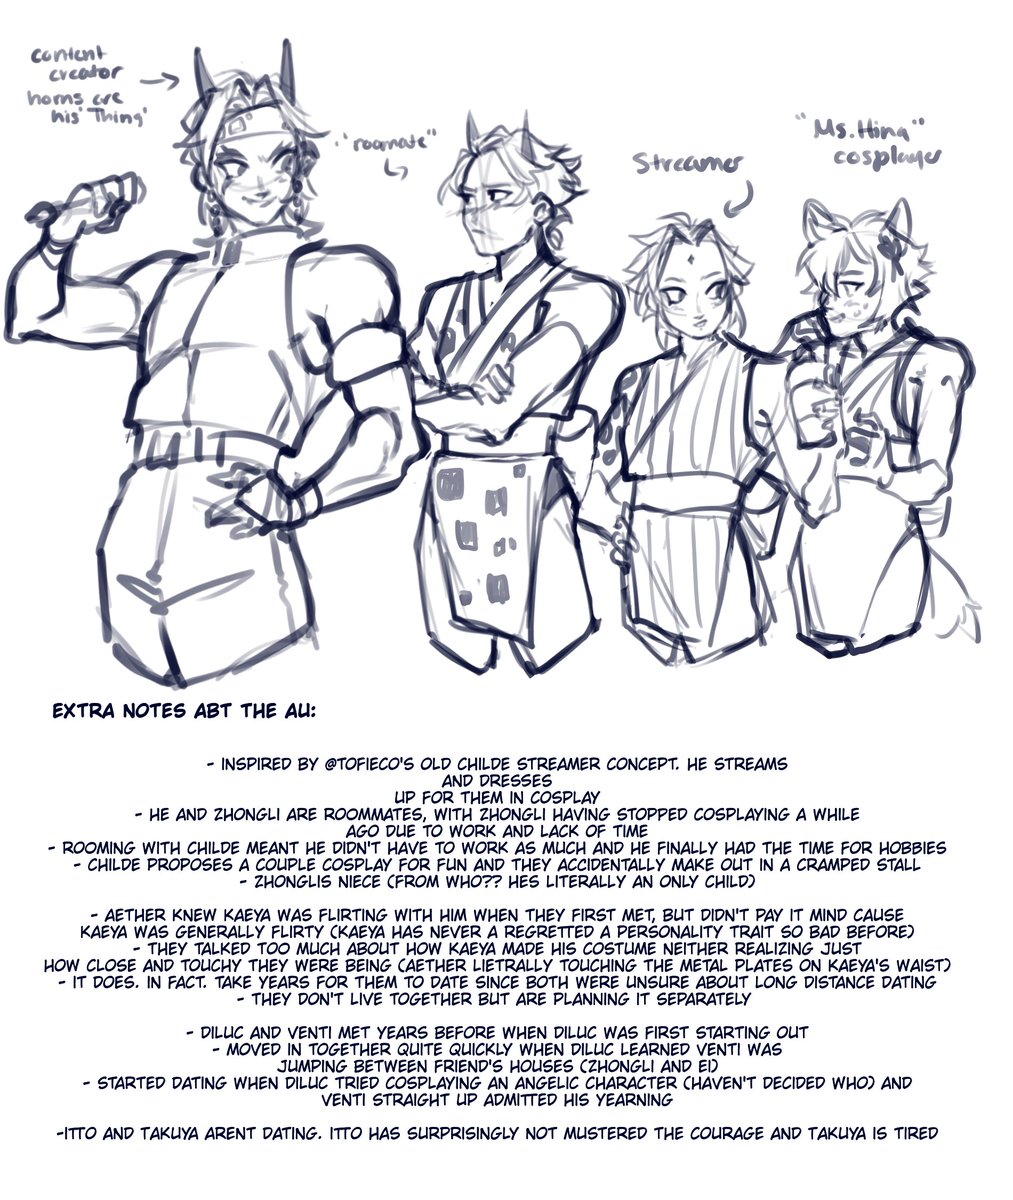 Copslay au lol + you're not obligated to read that l
ast slide
#tartali #kaether #diluven #ittorou #ittoxiao 